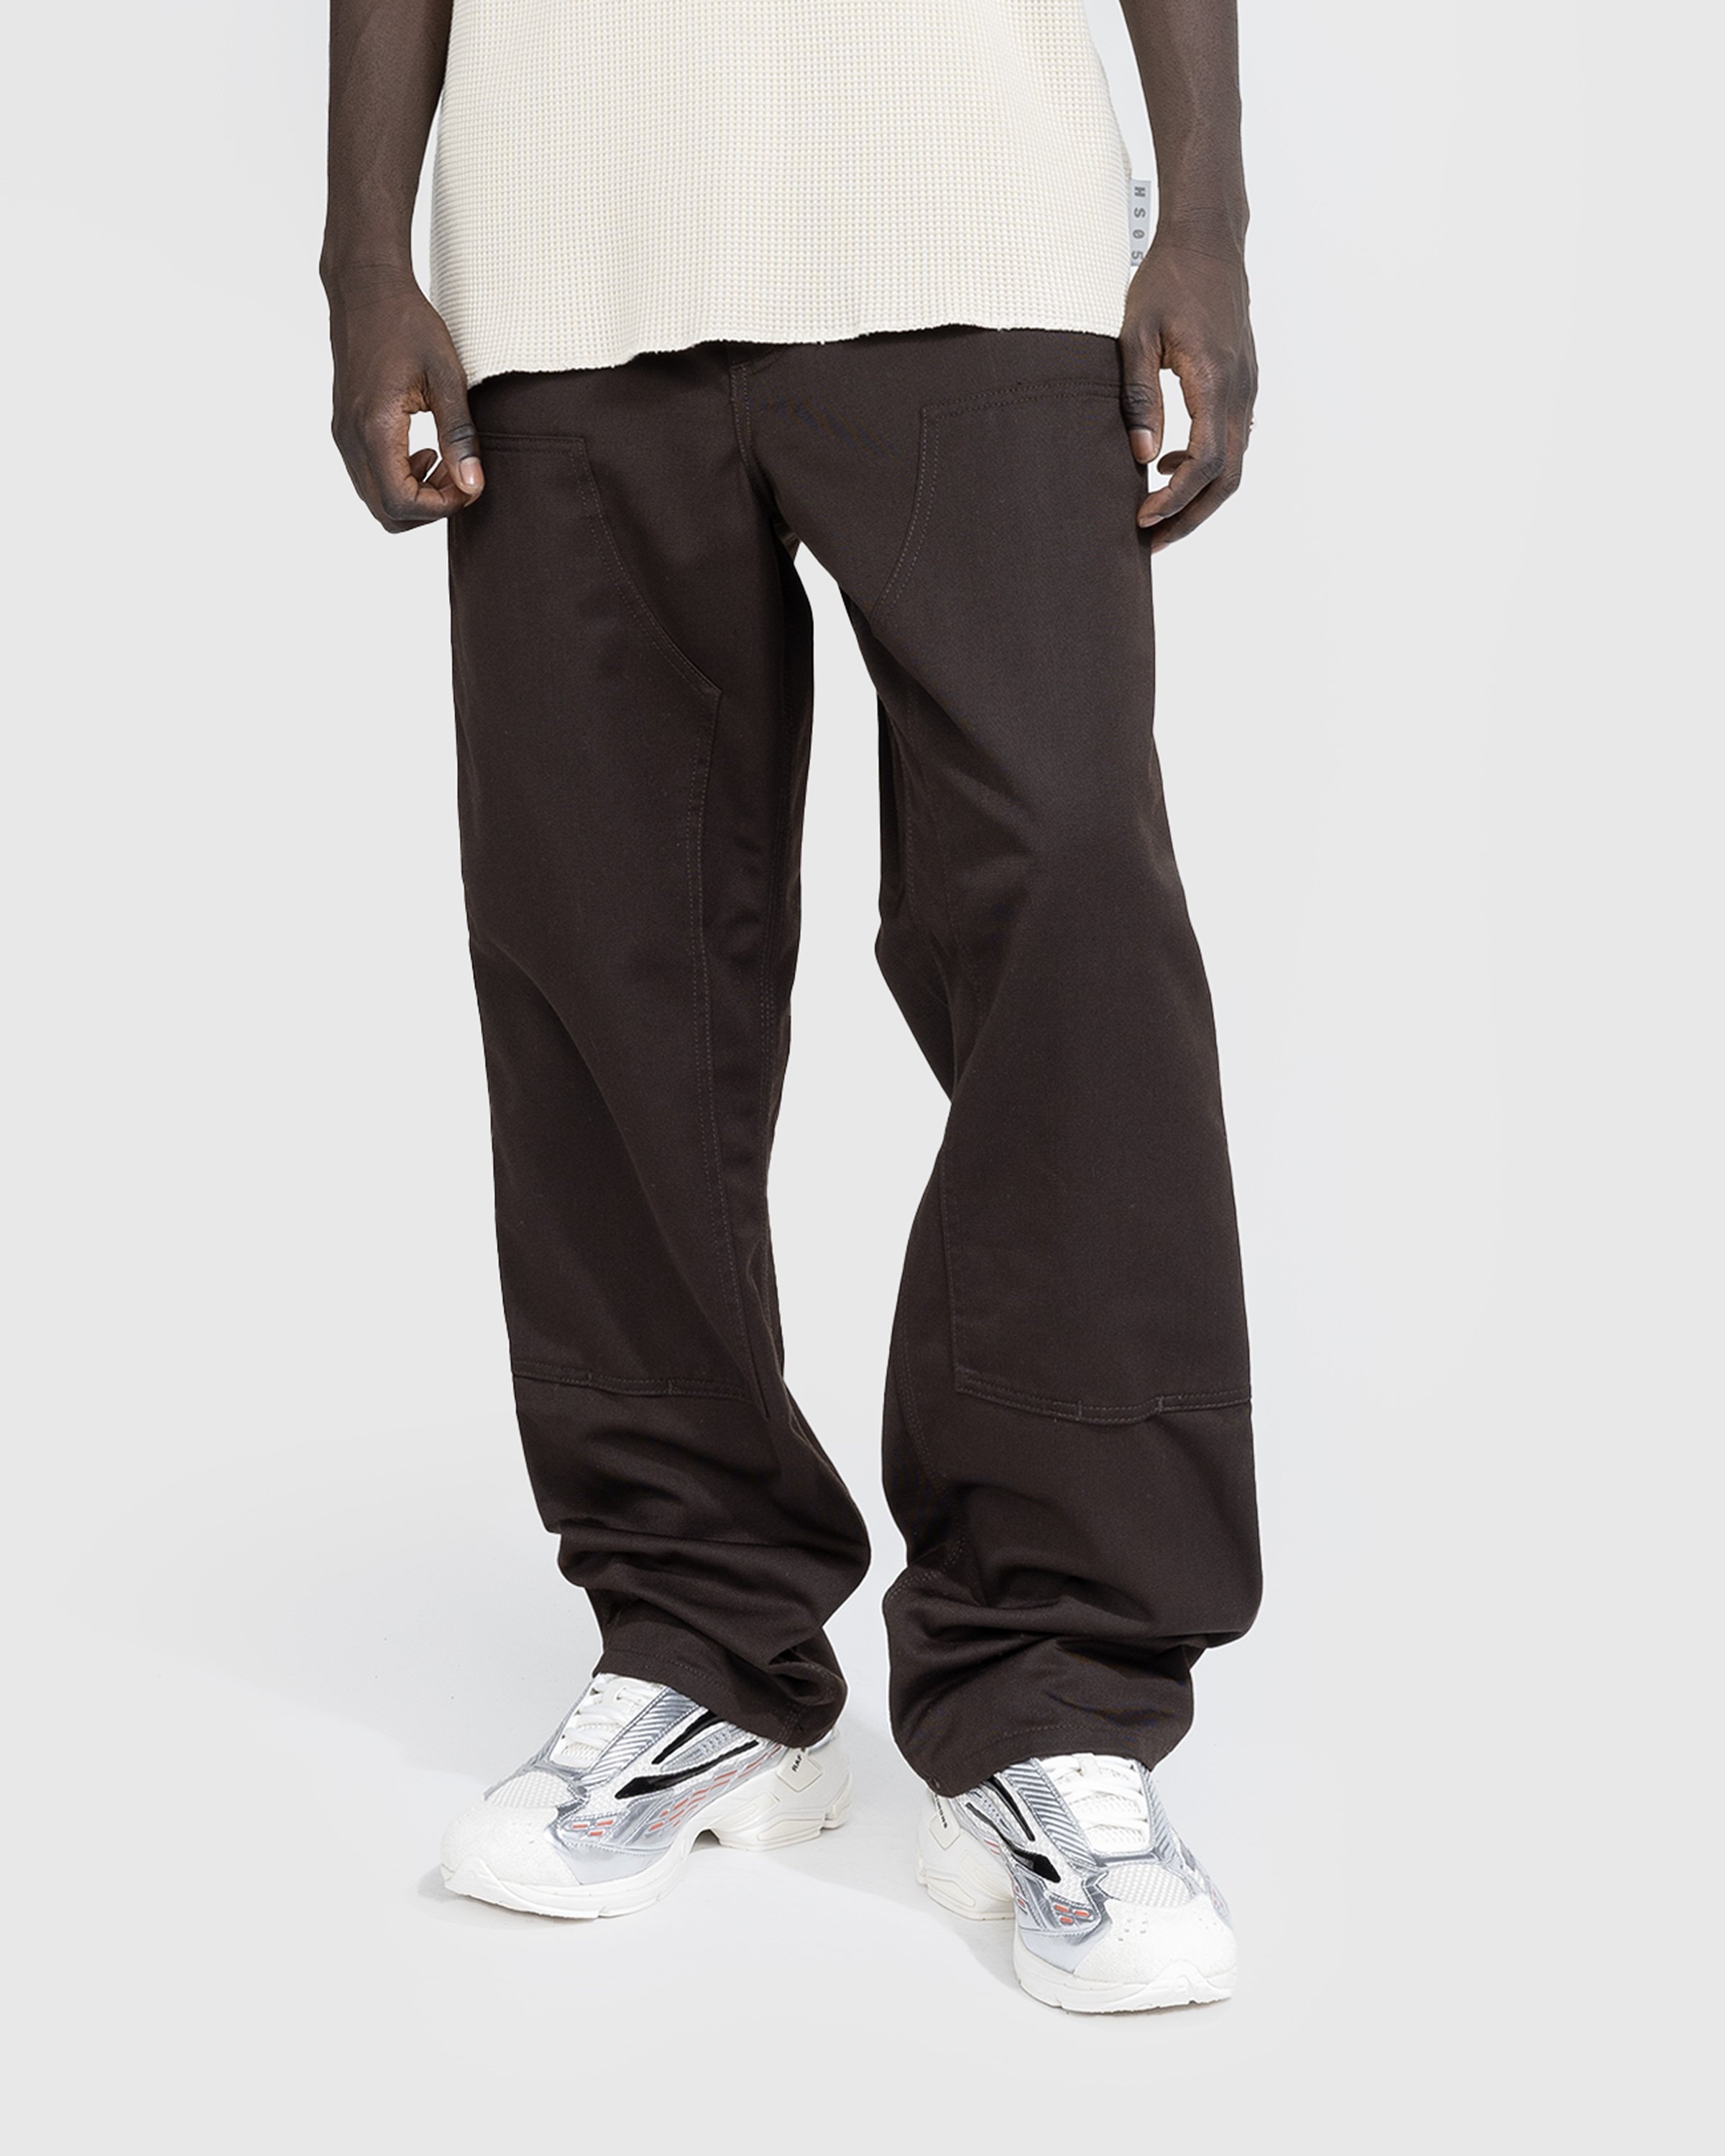 Carhartt Pants For Men Page 2 - Pants Store